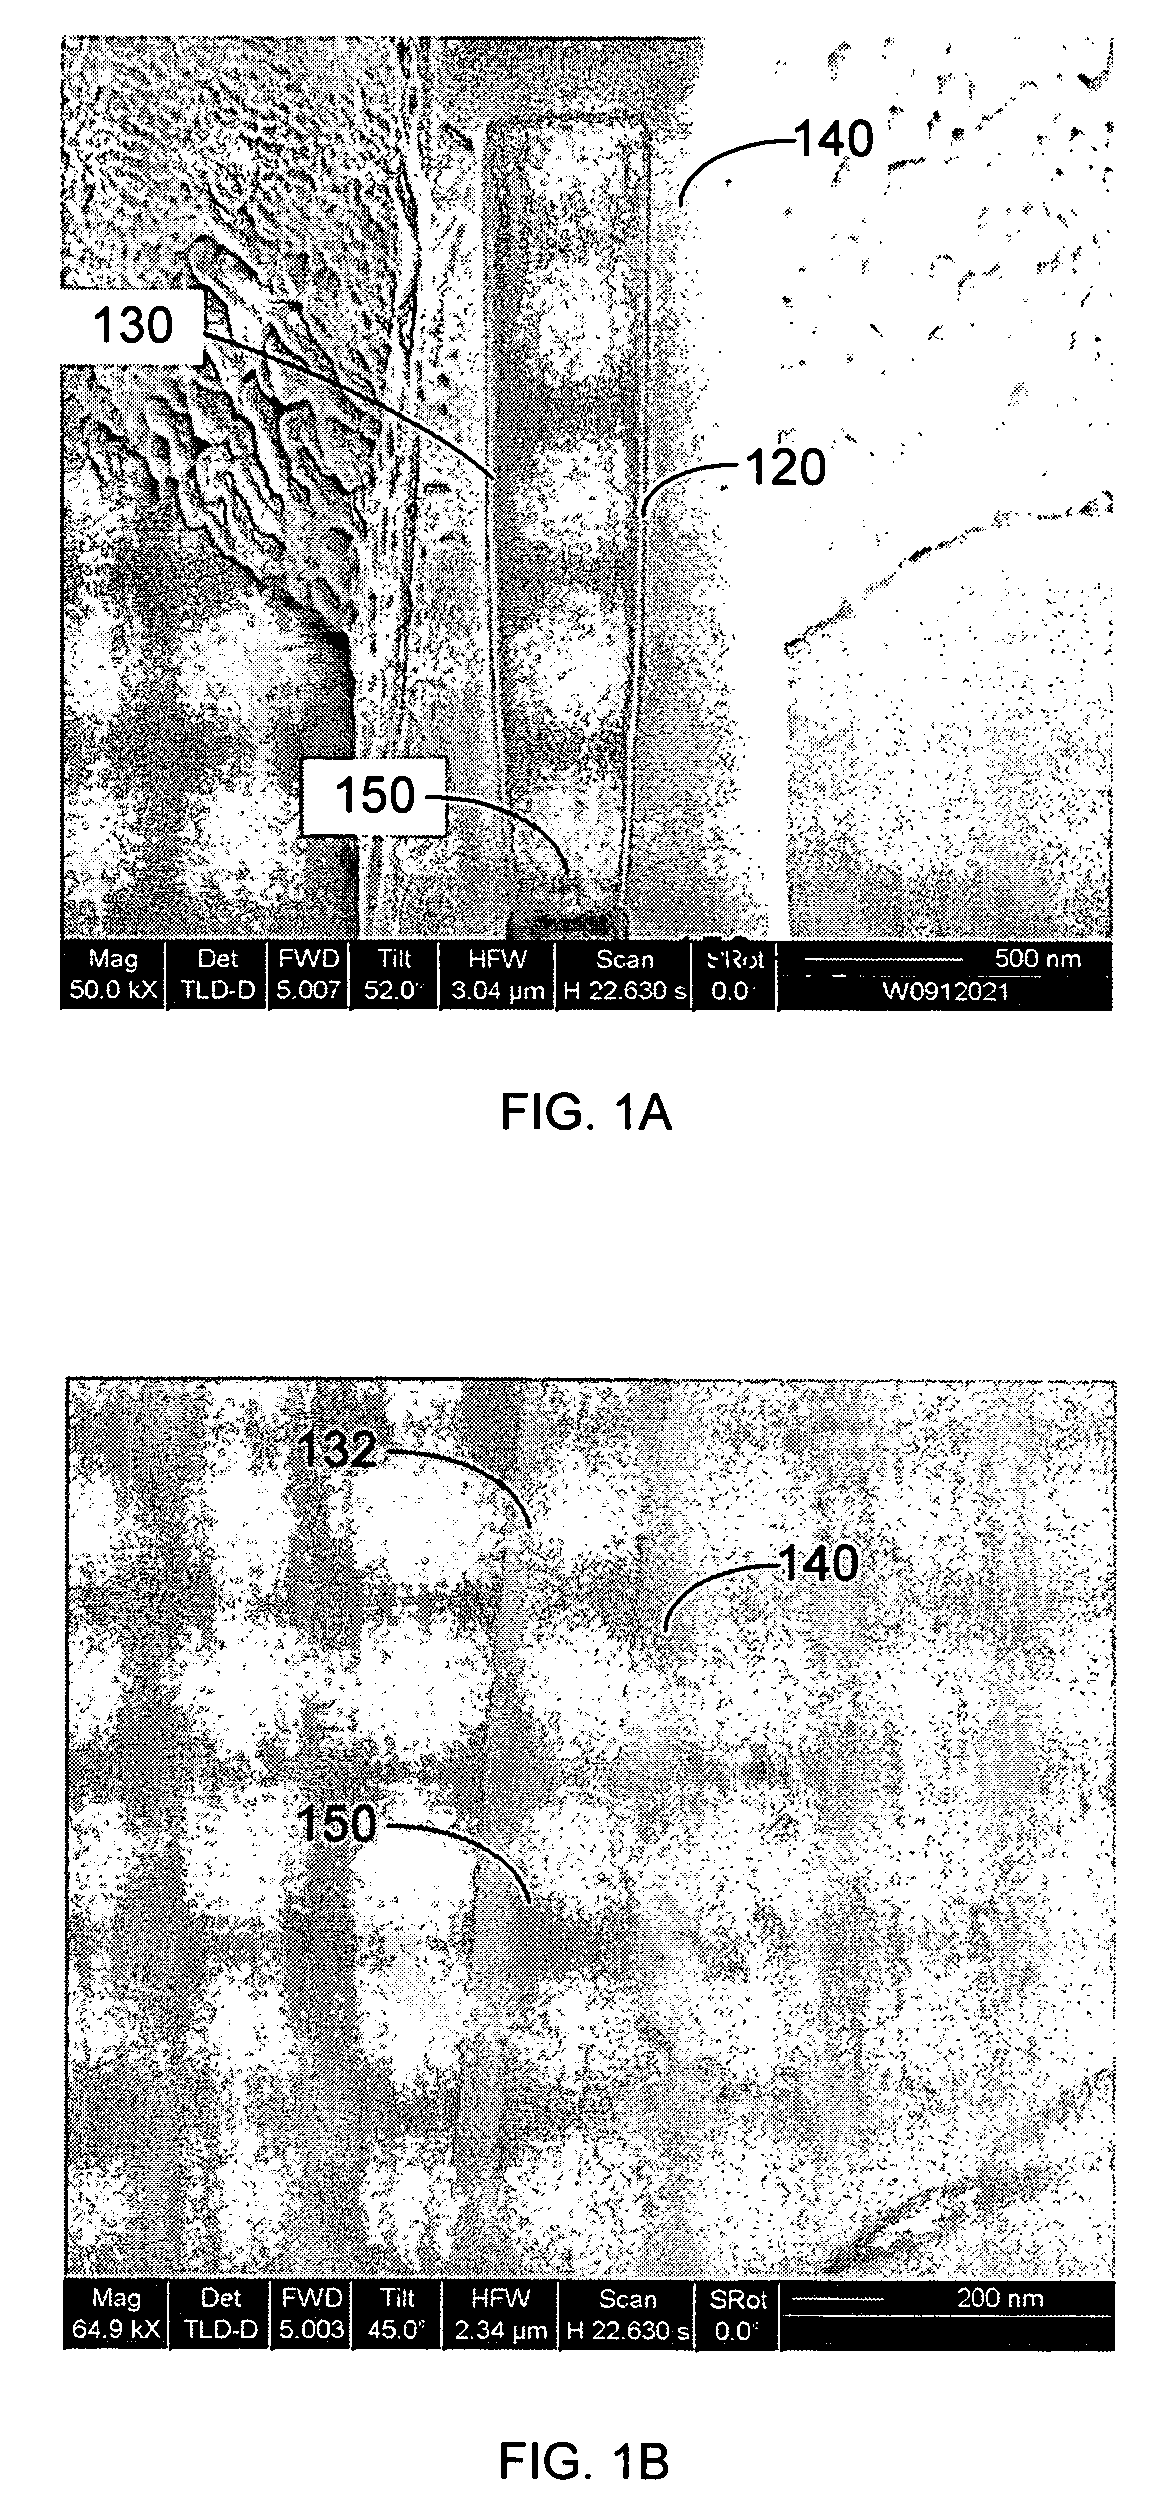 Method and apparatus for controlling topographical variation on a milled cross-section of a structure